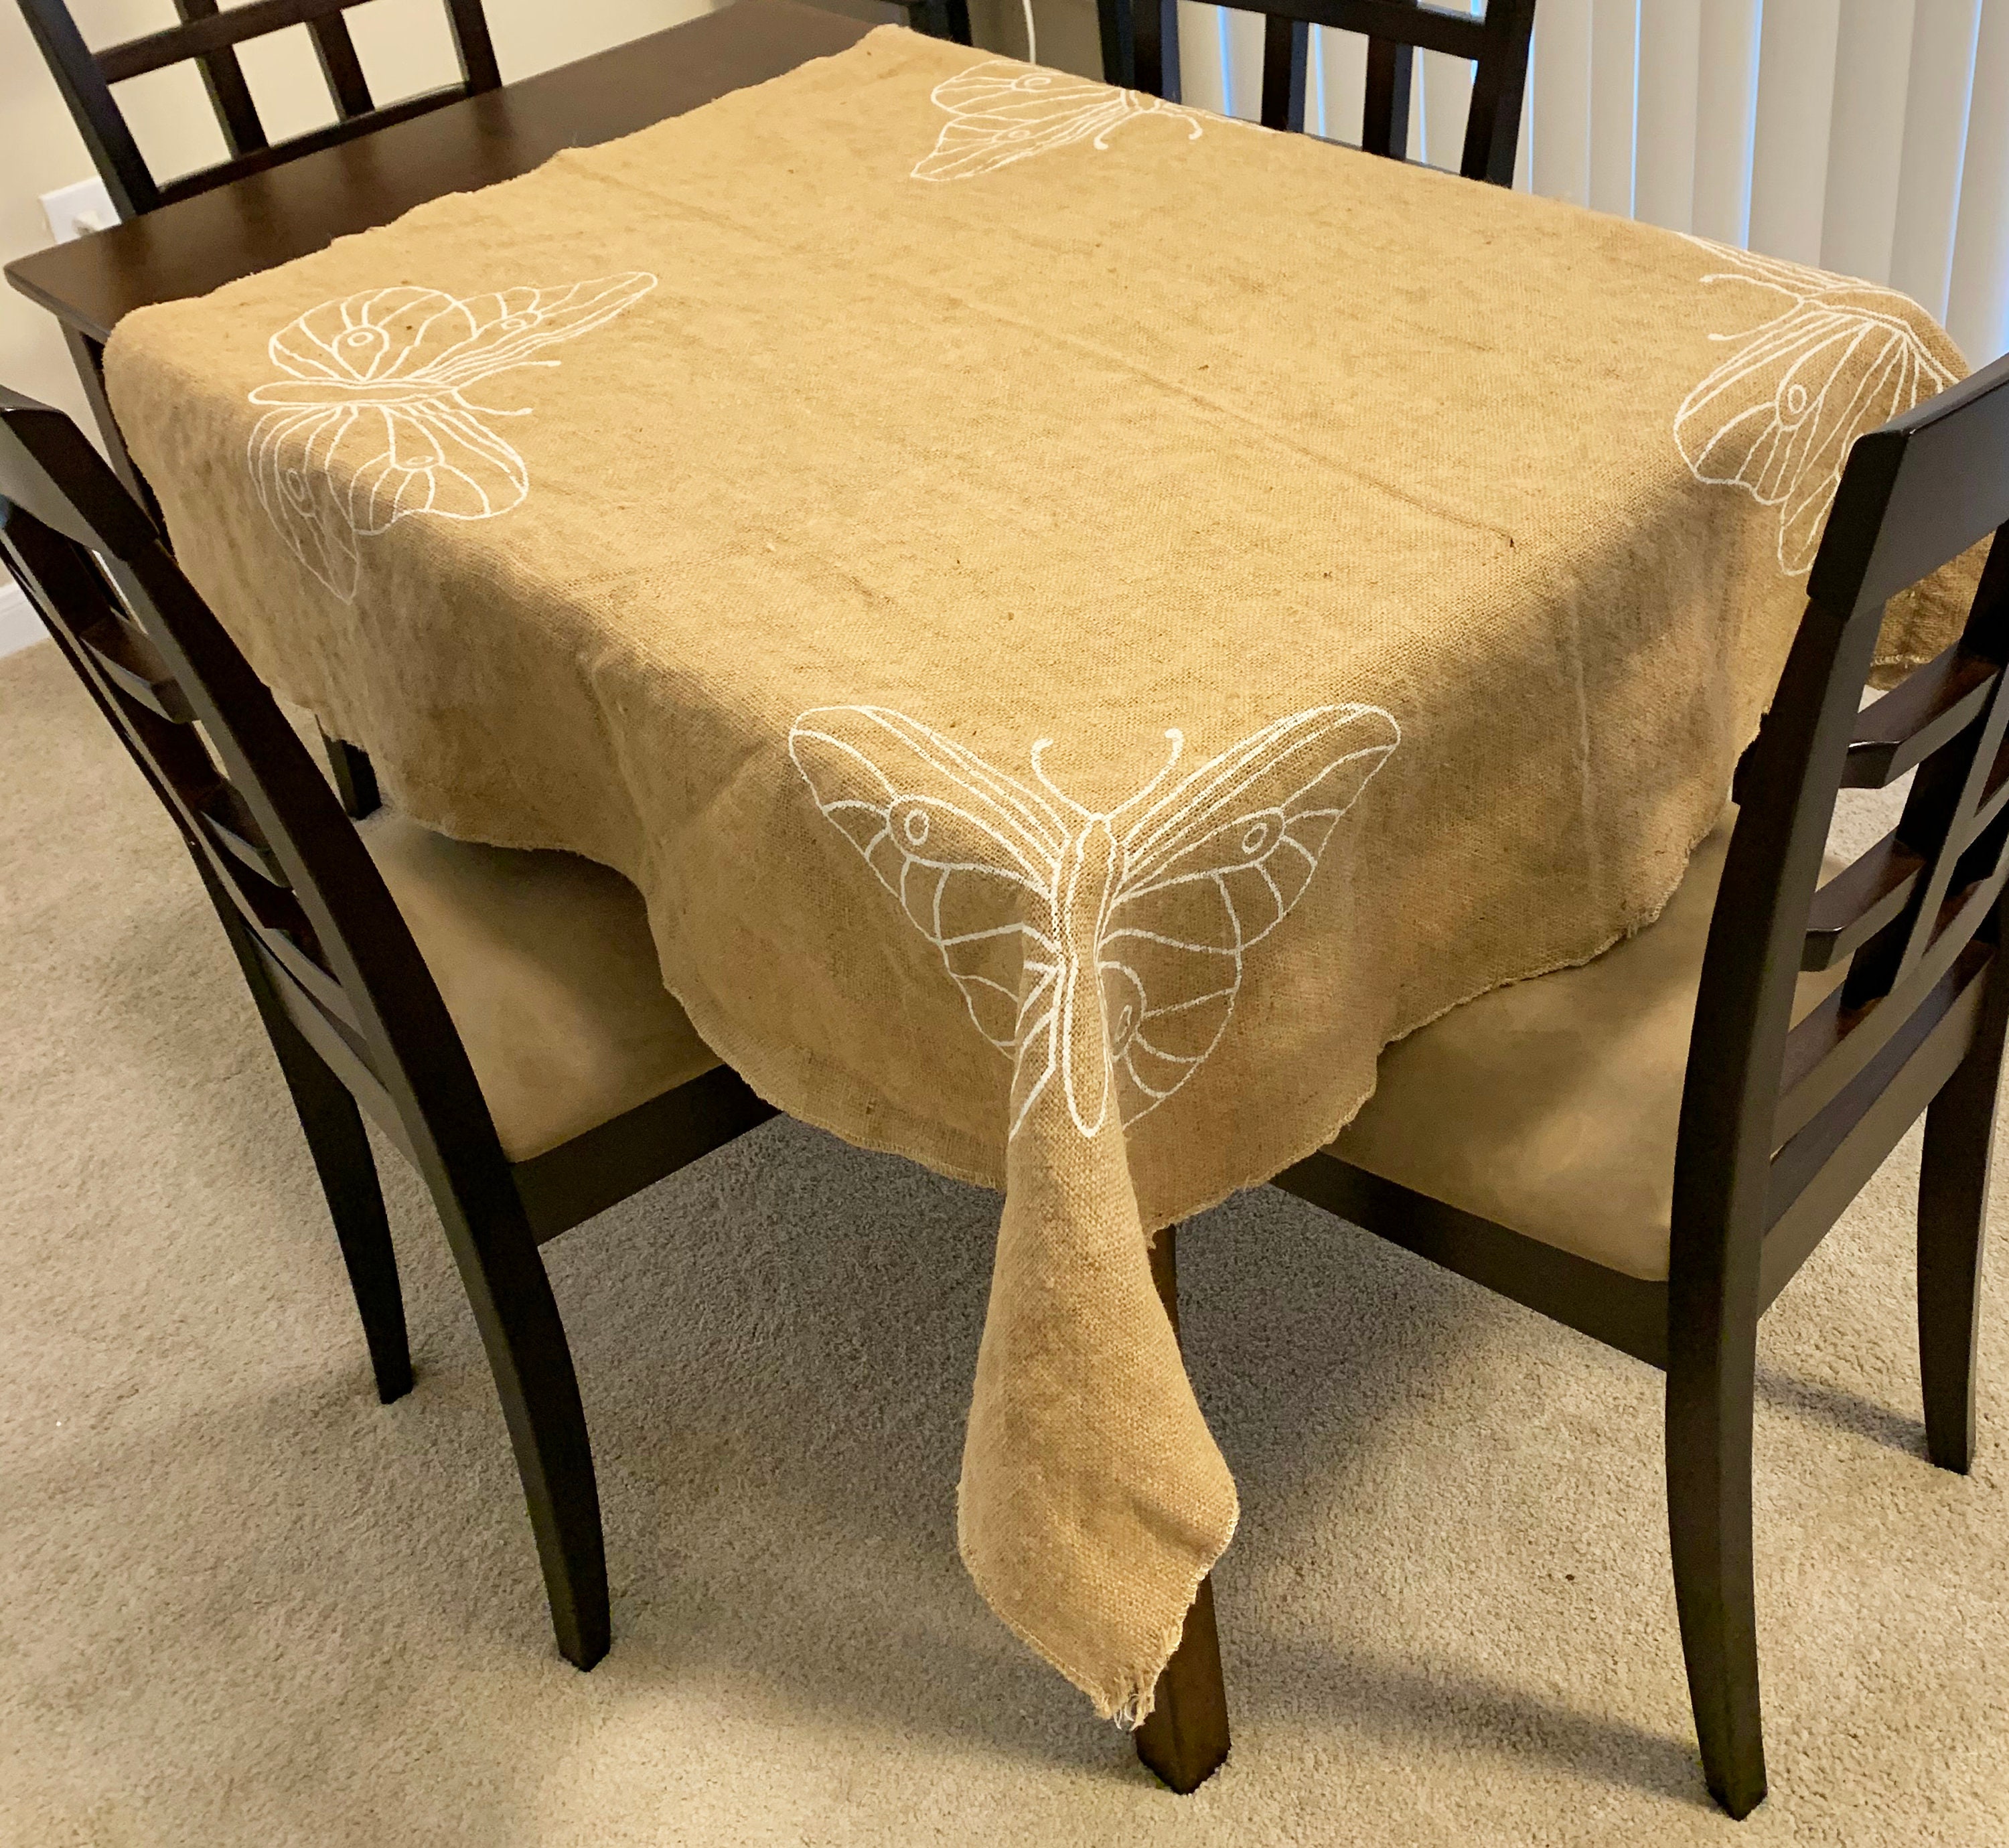 Jute Burlap Square Table Toppers Tablecloth, Corner Printed White Butterfly  Runner, Party Runner, Table Runners, Rustic Natural Color Burlap - Etsy